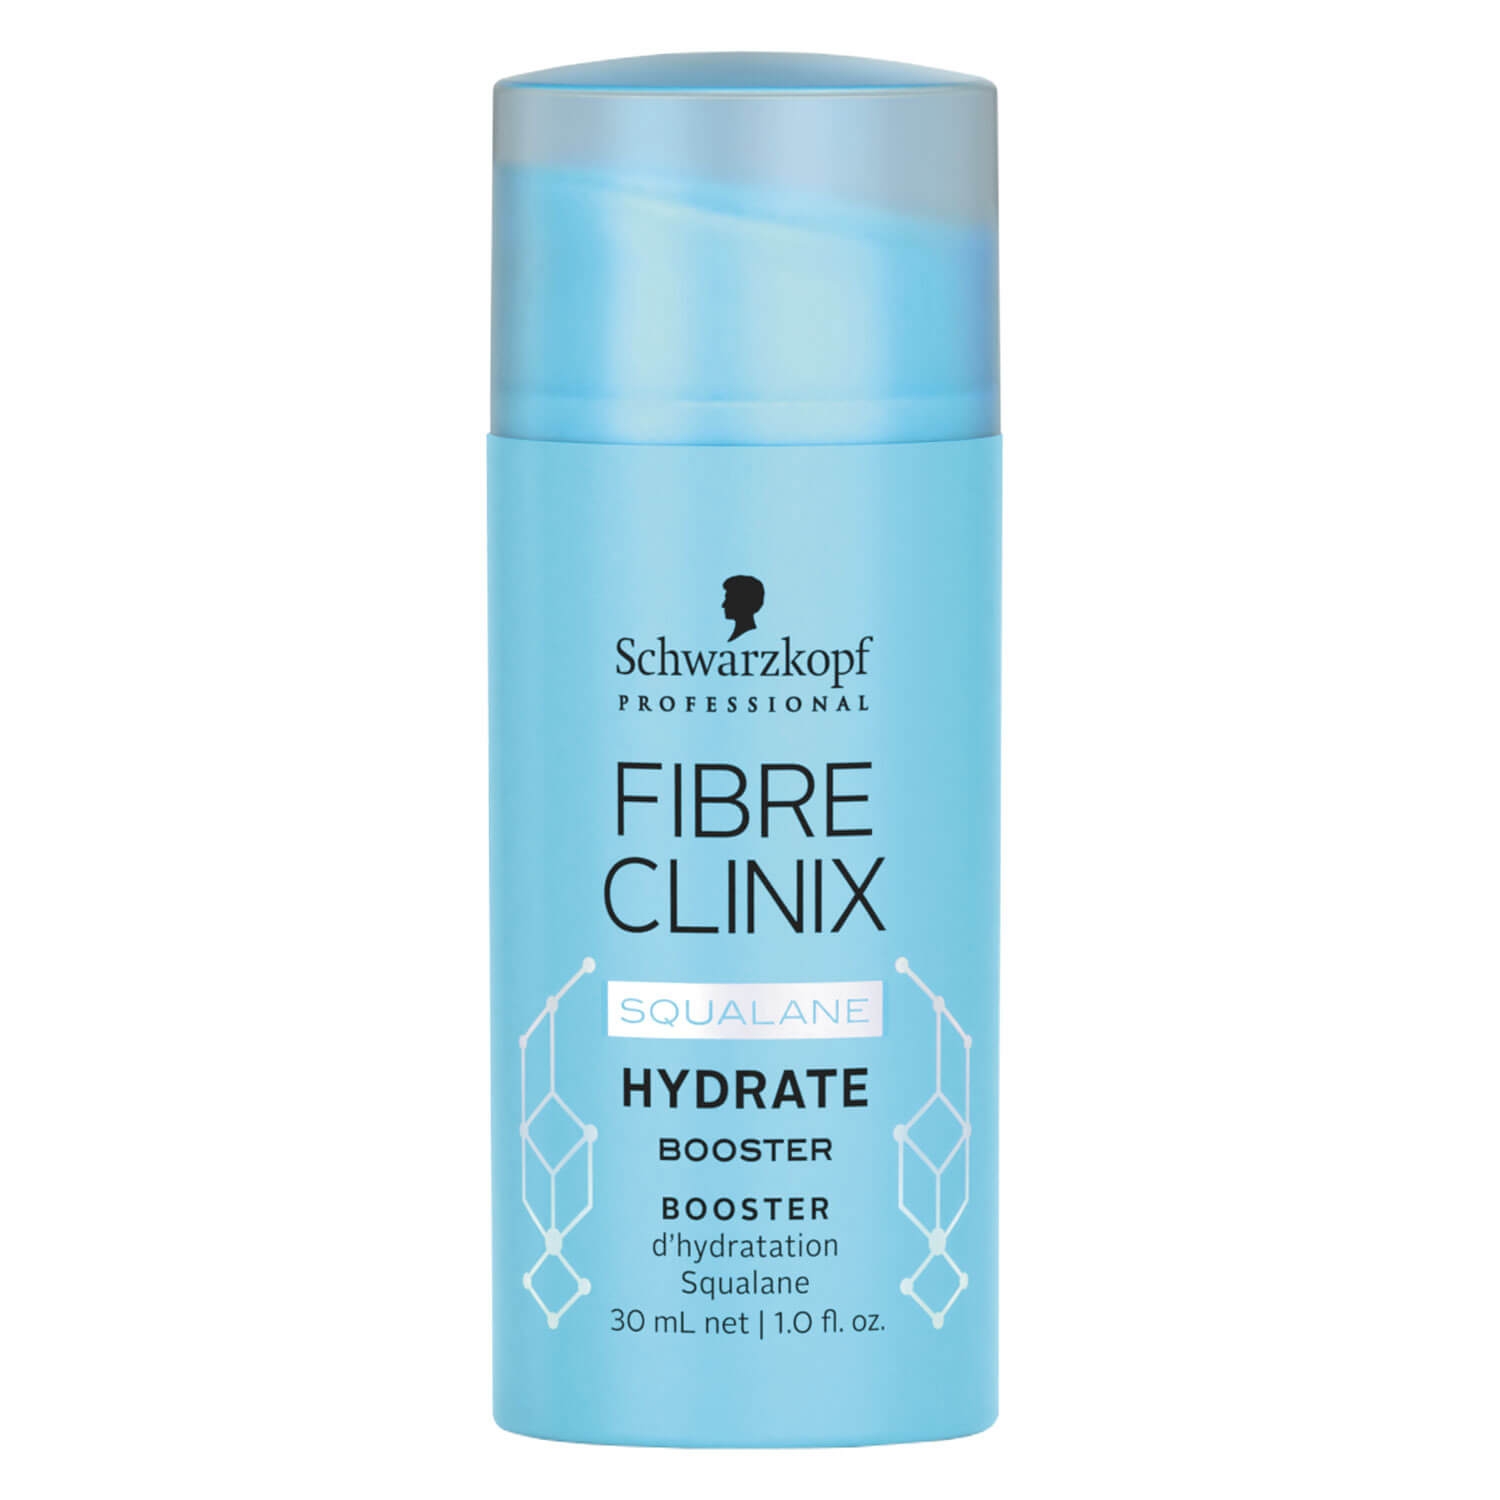 Product image from Fibre Clinix - Hydrate Booster